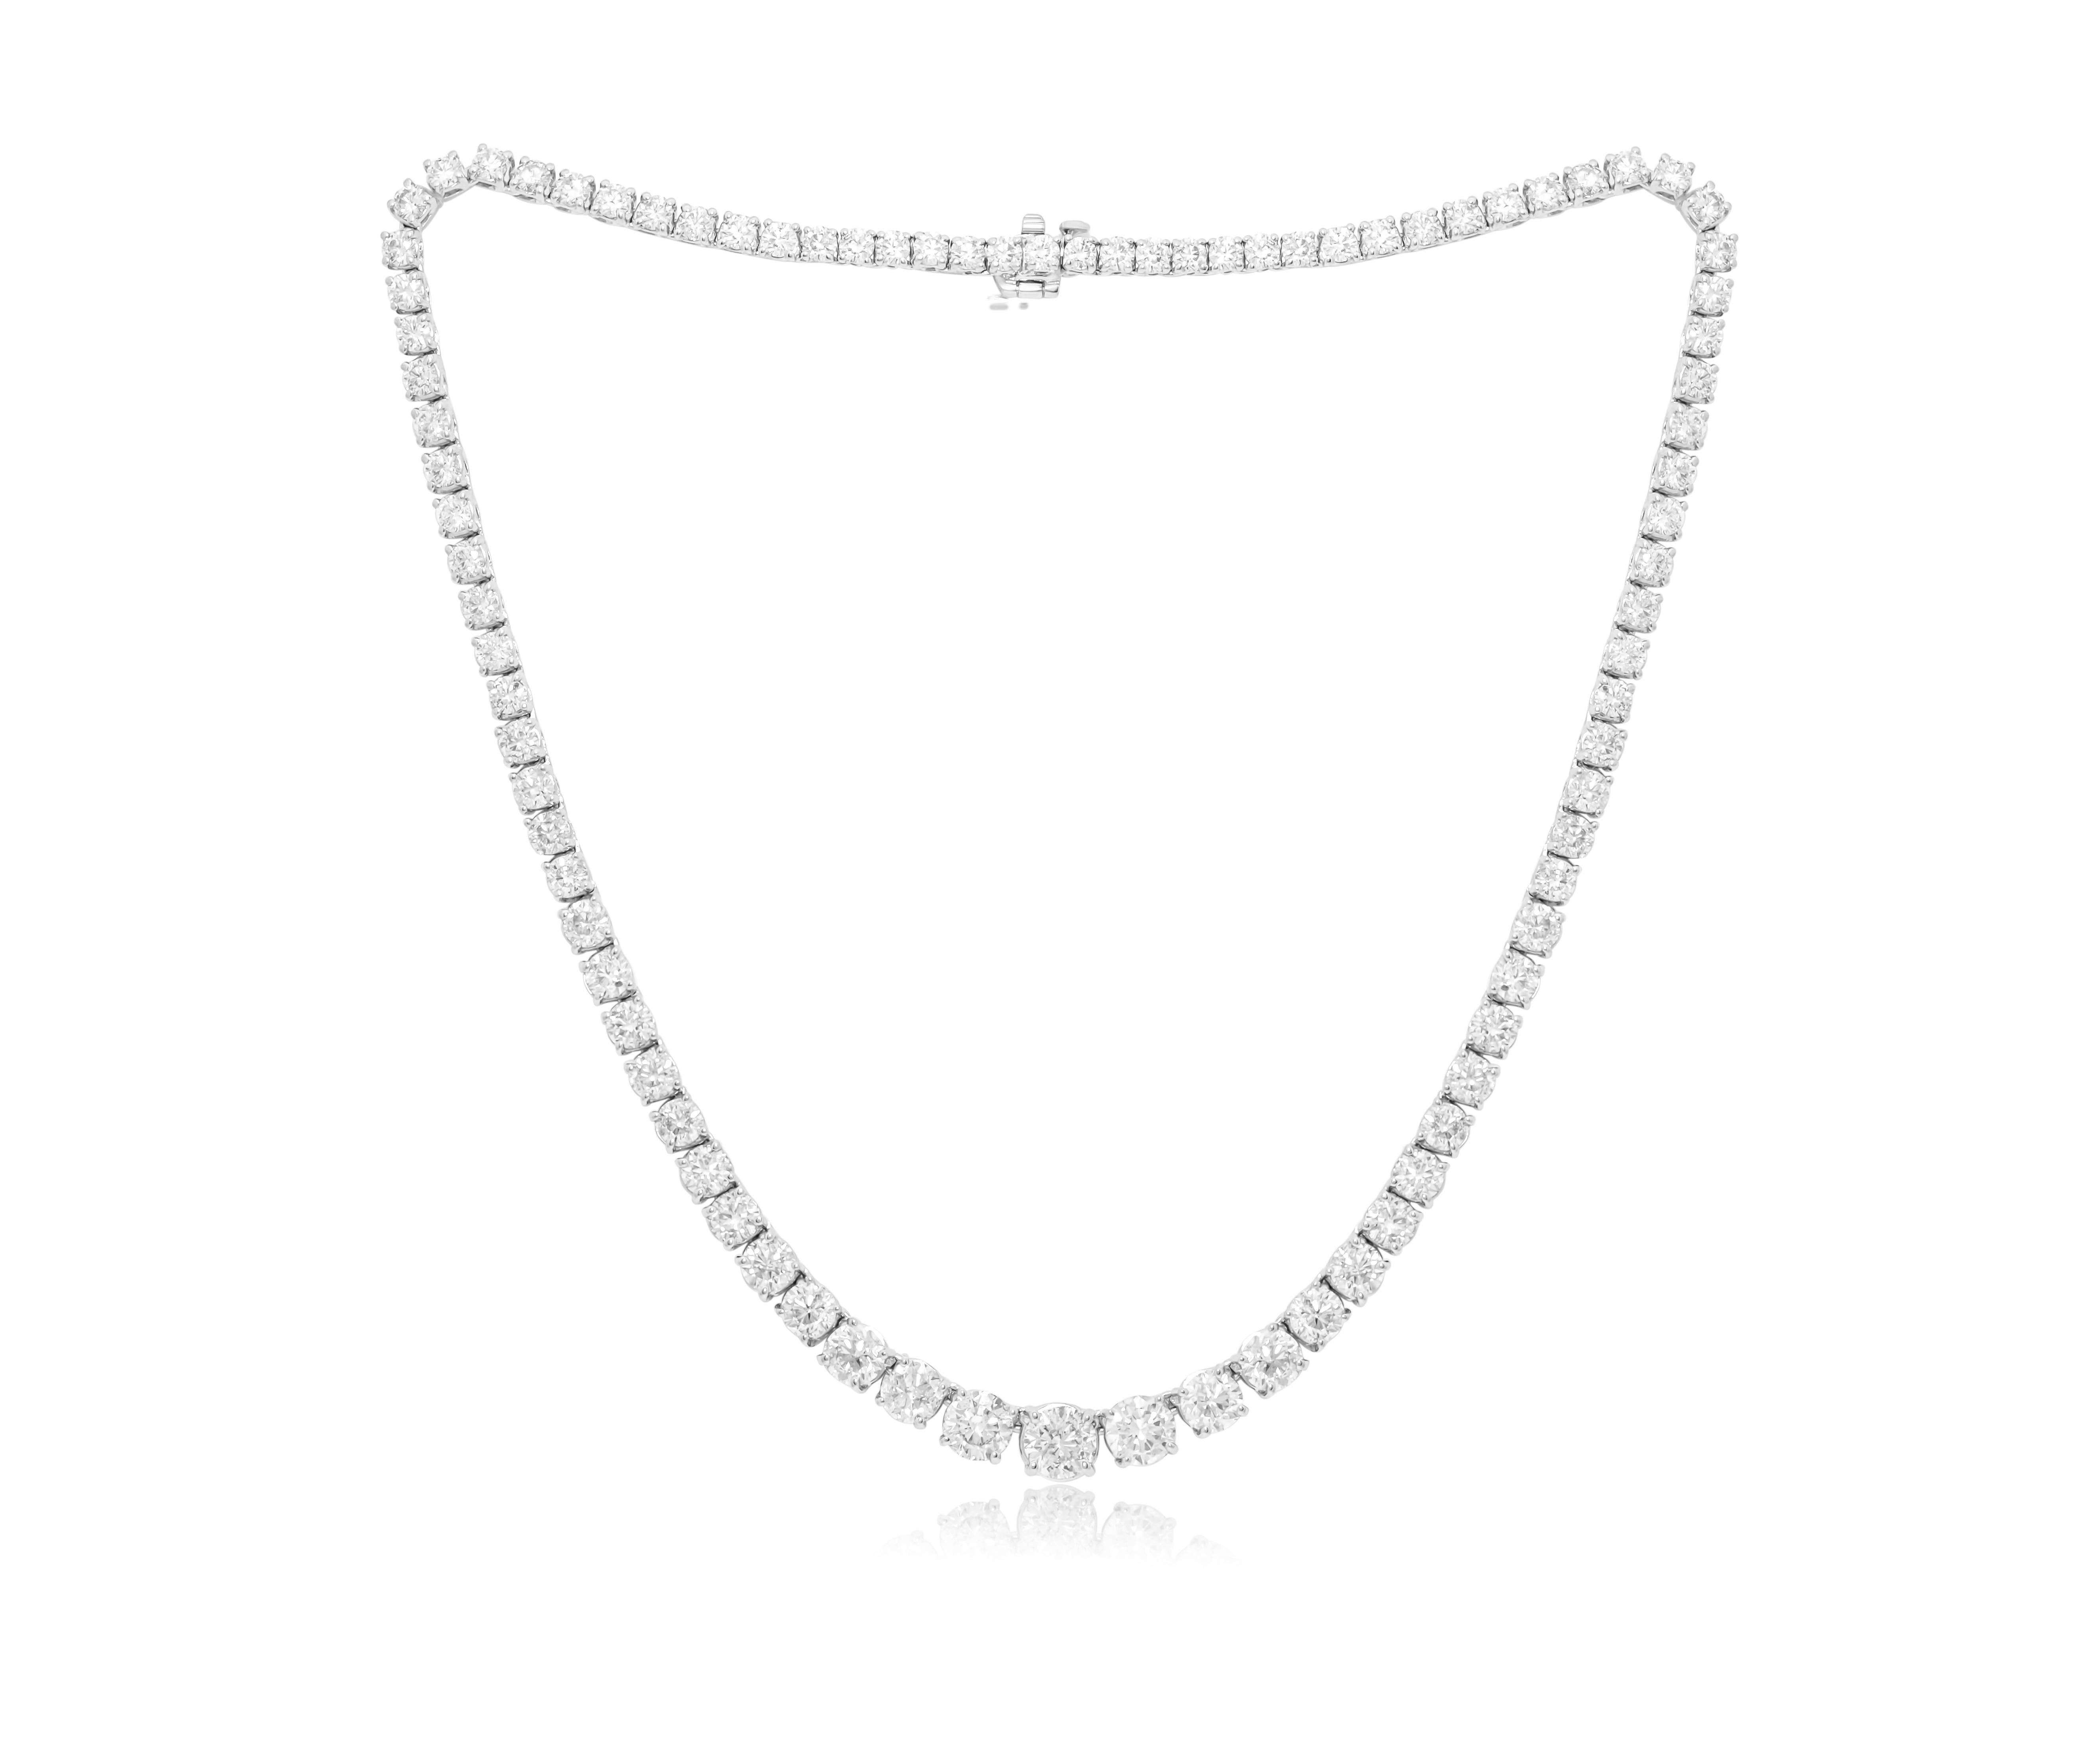 Custom 18k white gold graduated tennis necklace 17.45cts round diamonds set in 3 prongs. Color FG SI clarity. Excellent cut.